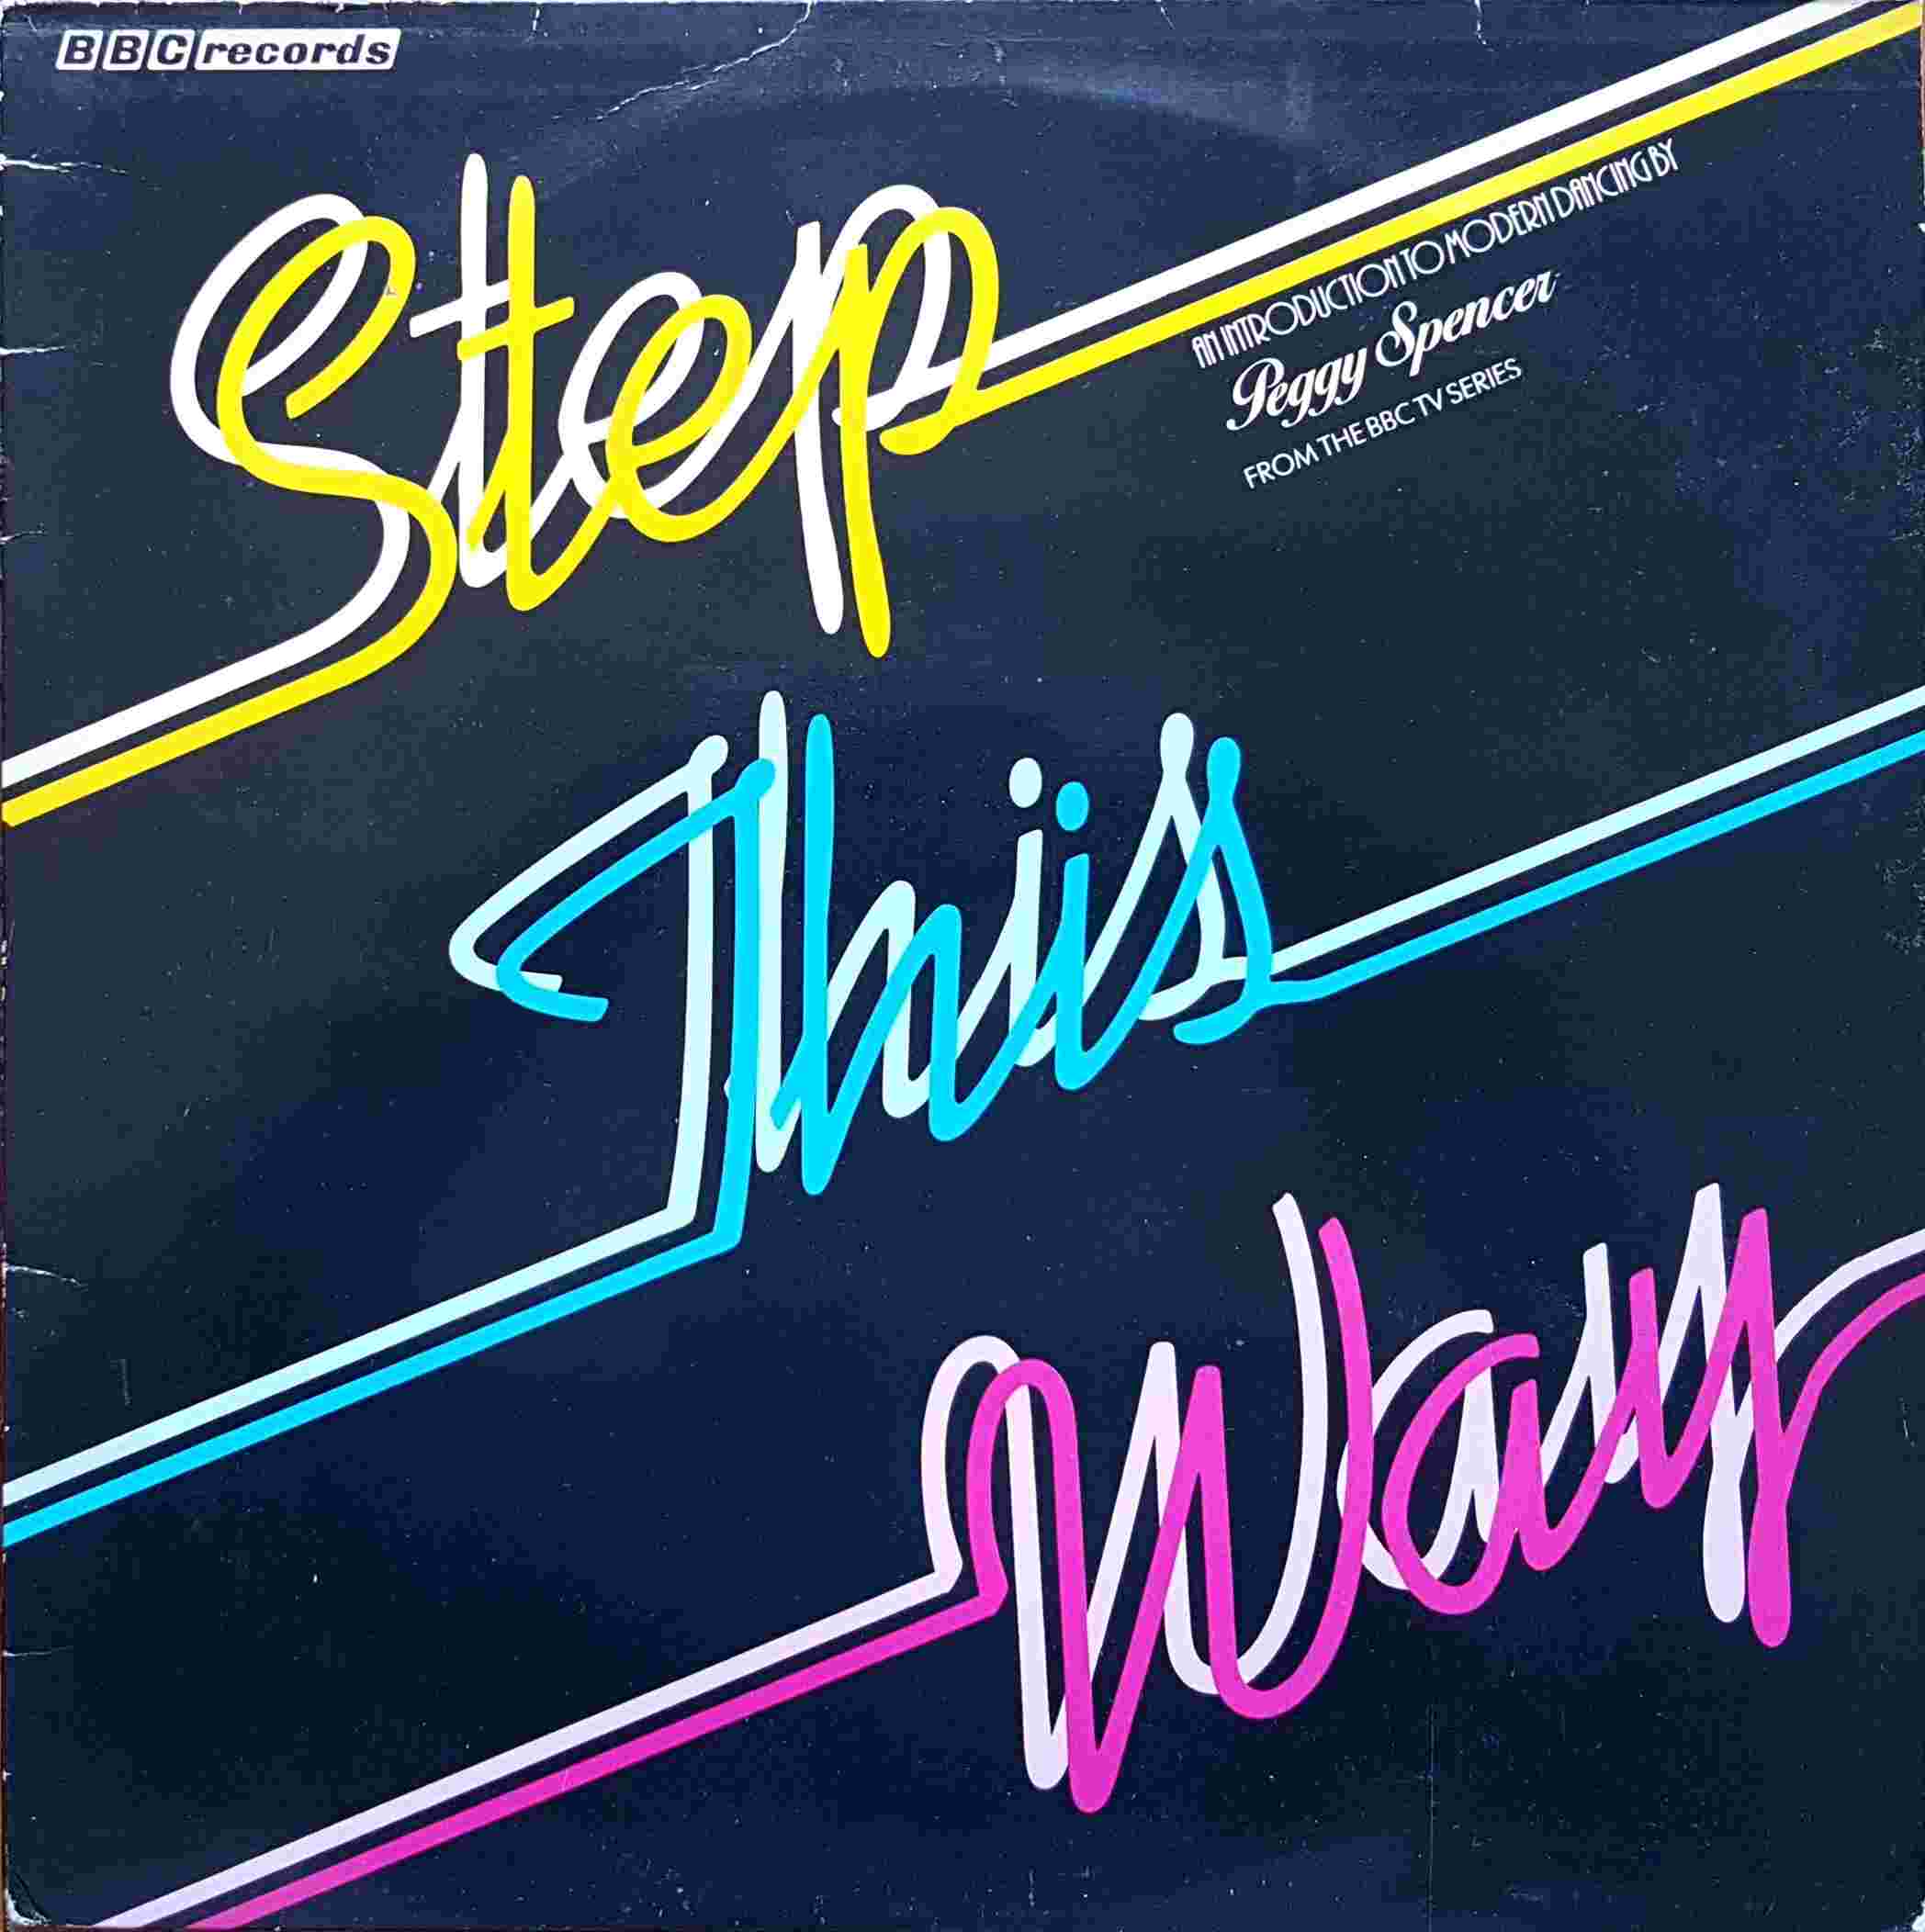 Picture of REC 374 Step this way by artist Peggy Spencer from the BBC albums - Records and Tapes library